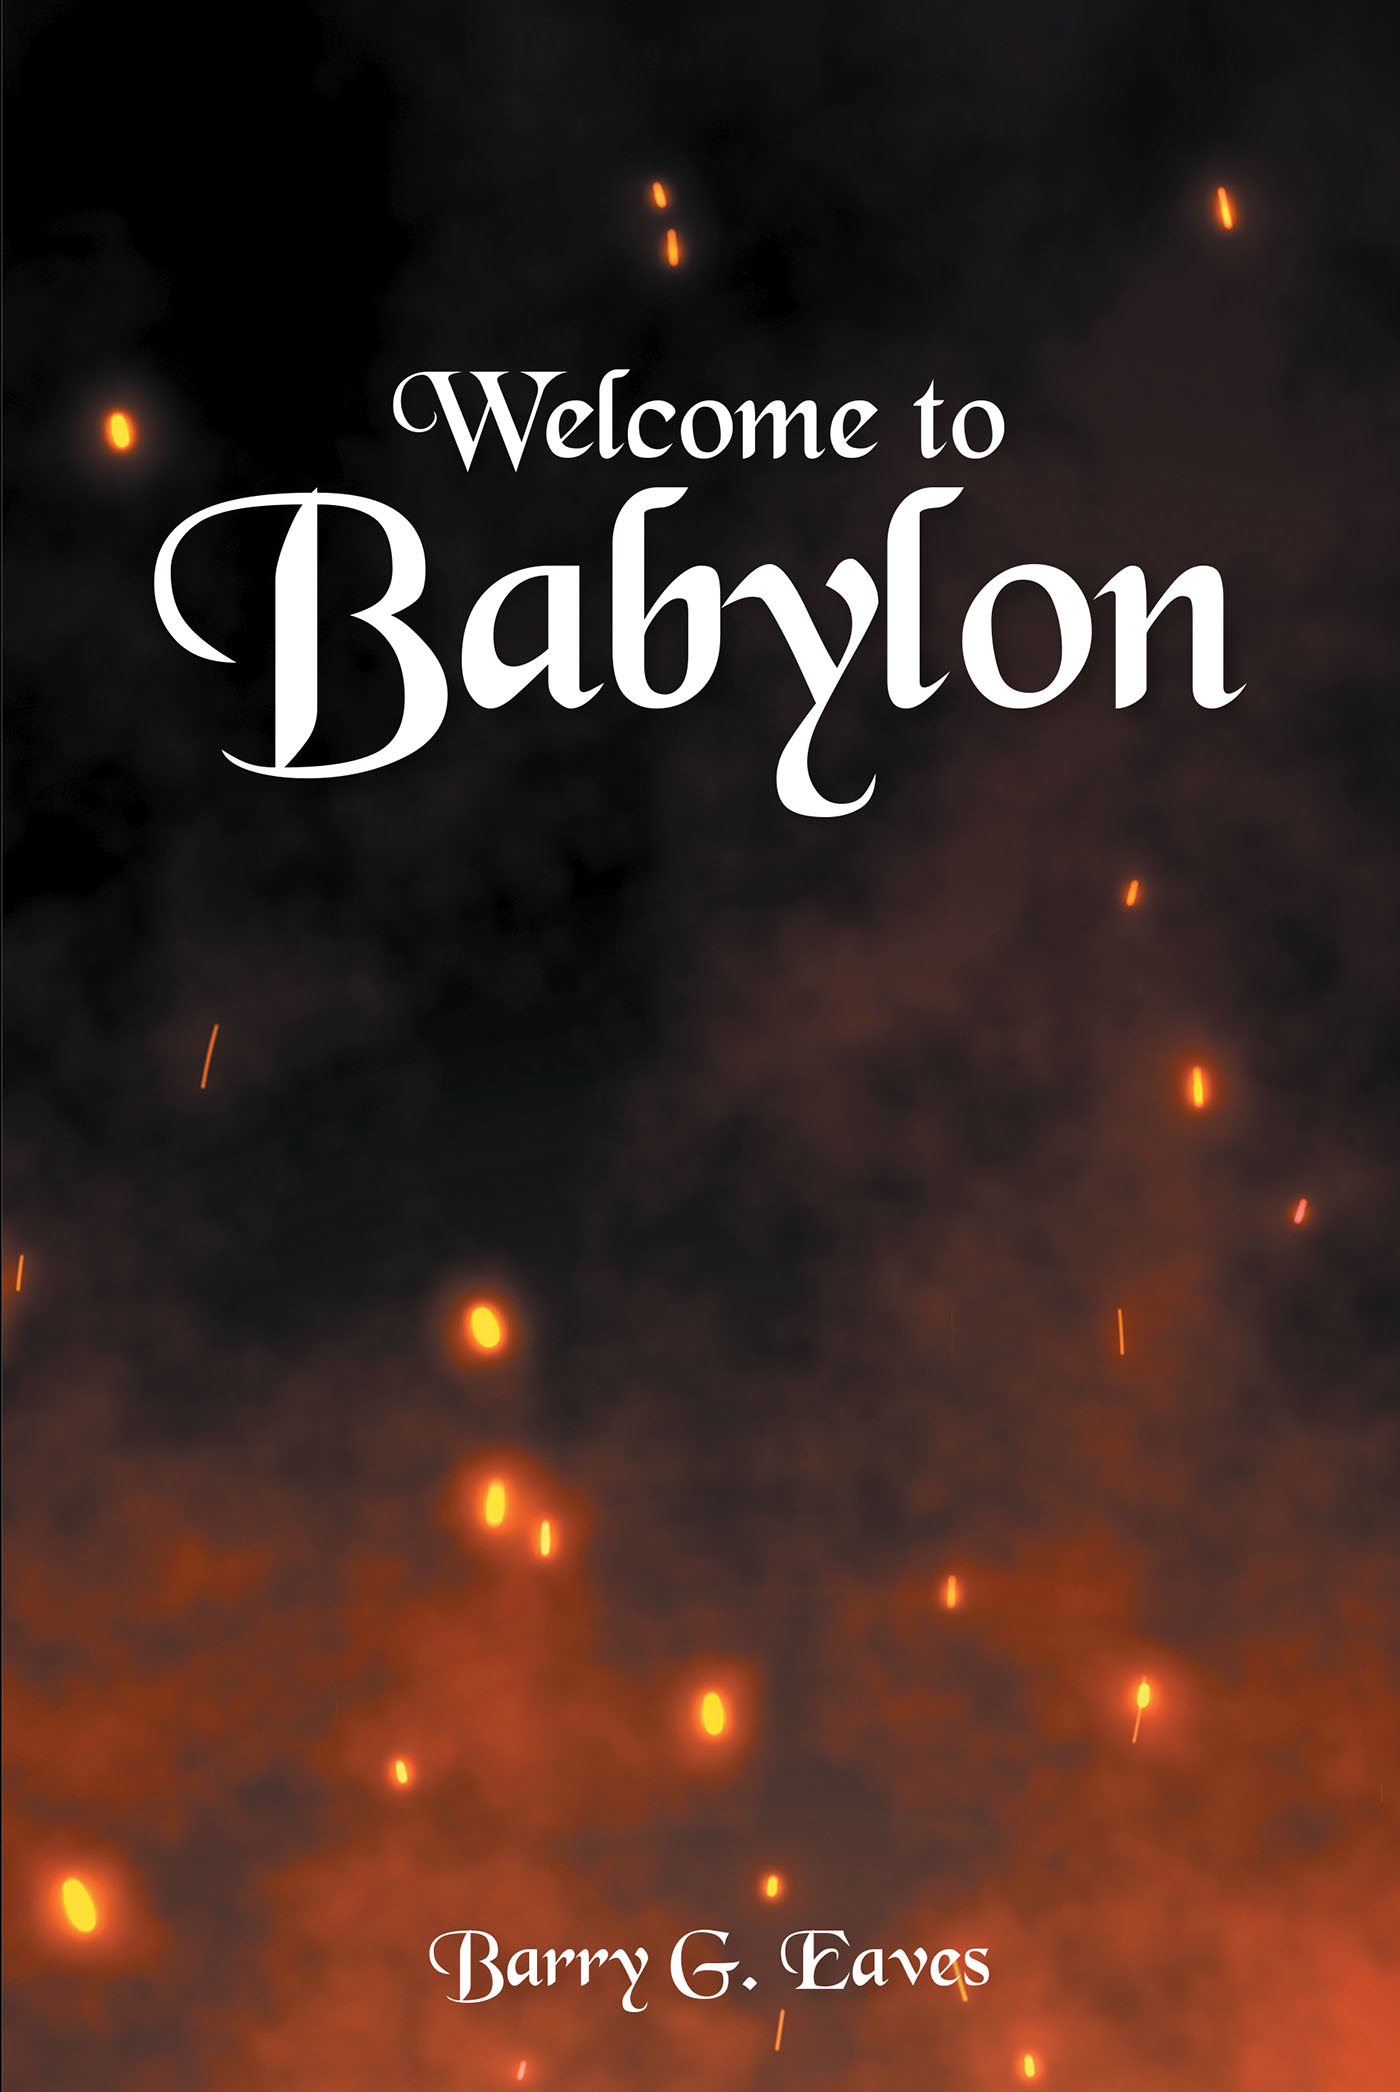 Author Barry G. Eaves’s New Book, "Welcome to Babylon," Looks at Various Signs Within Society That Signal the End Times Are Quickly Approaching, as Promised in Scripture